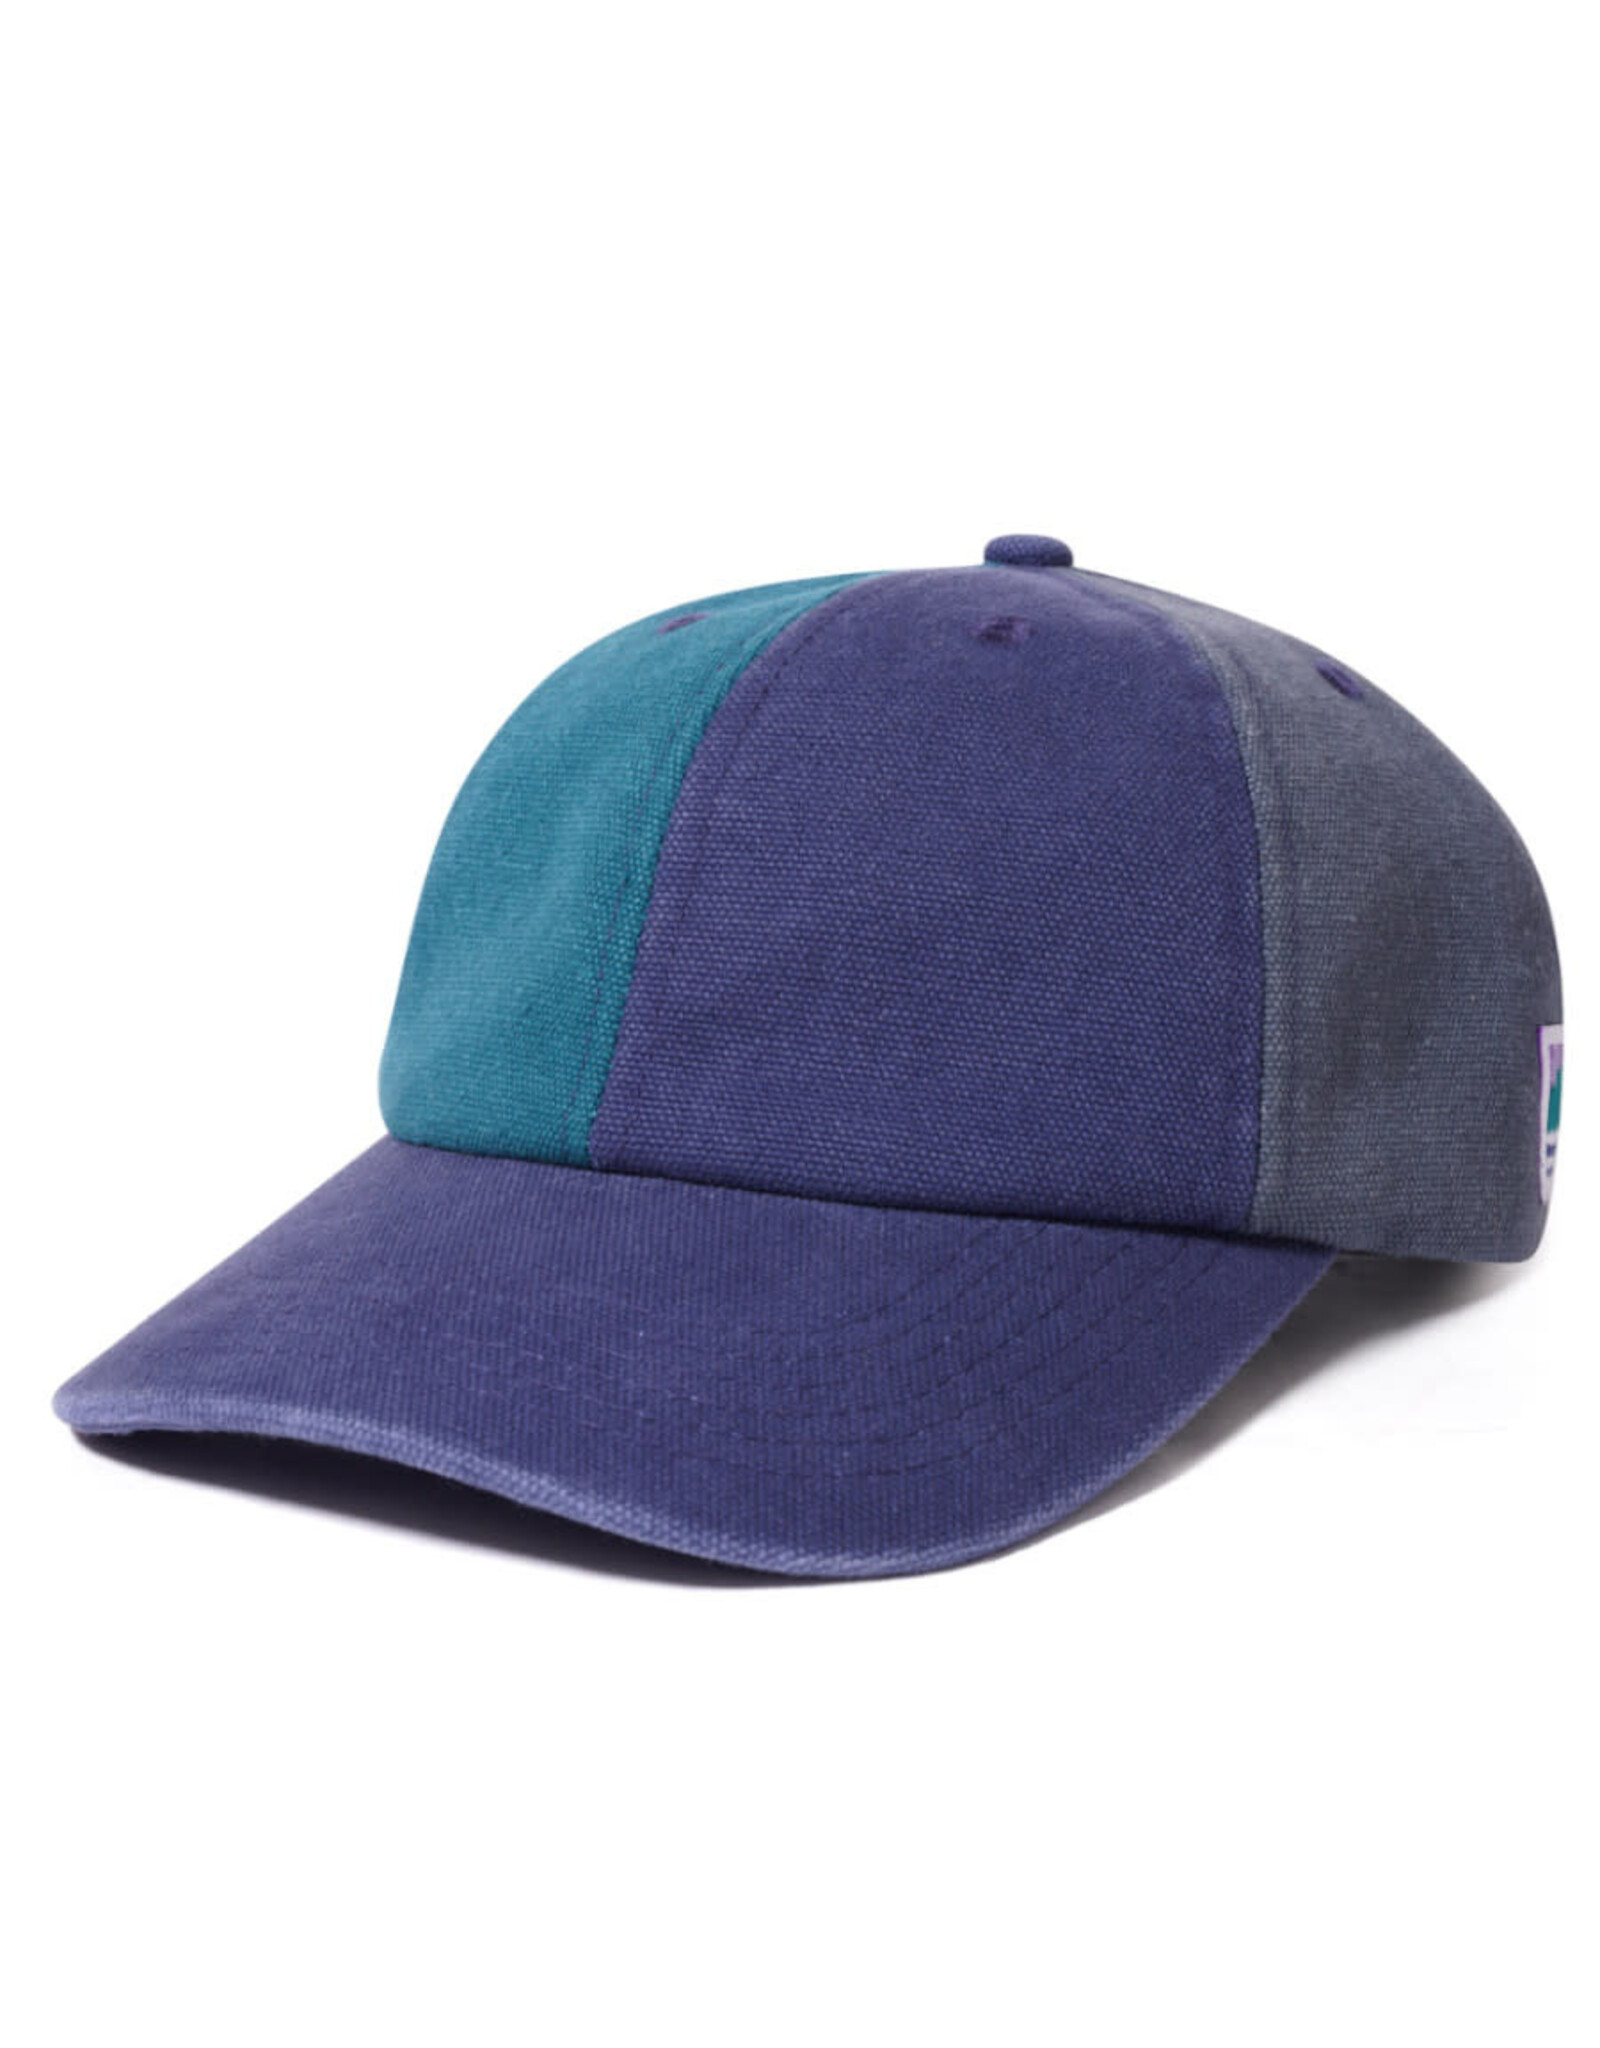 Butter Goods Butter Goods Hat Canvas Patchwork 6 Panel Strapback (Washed Navy)